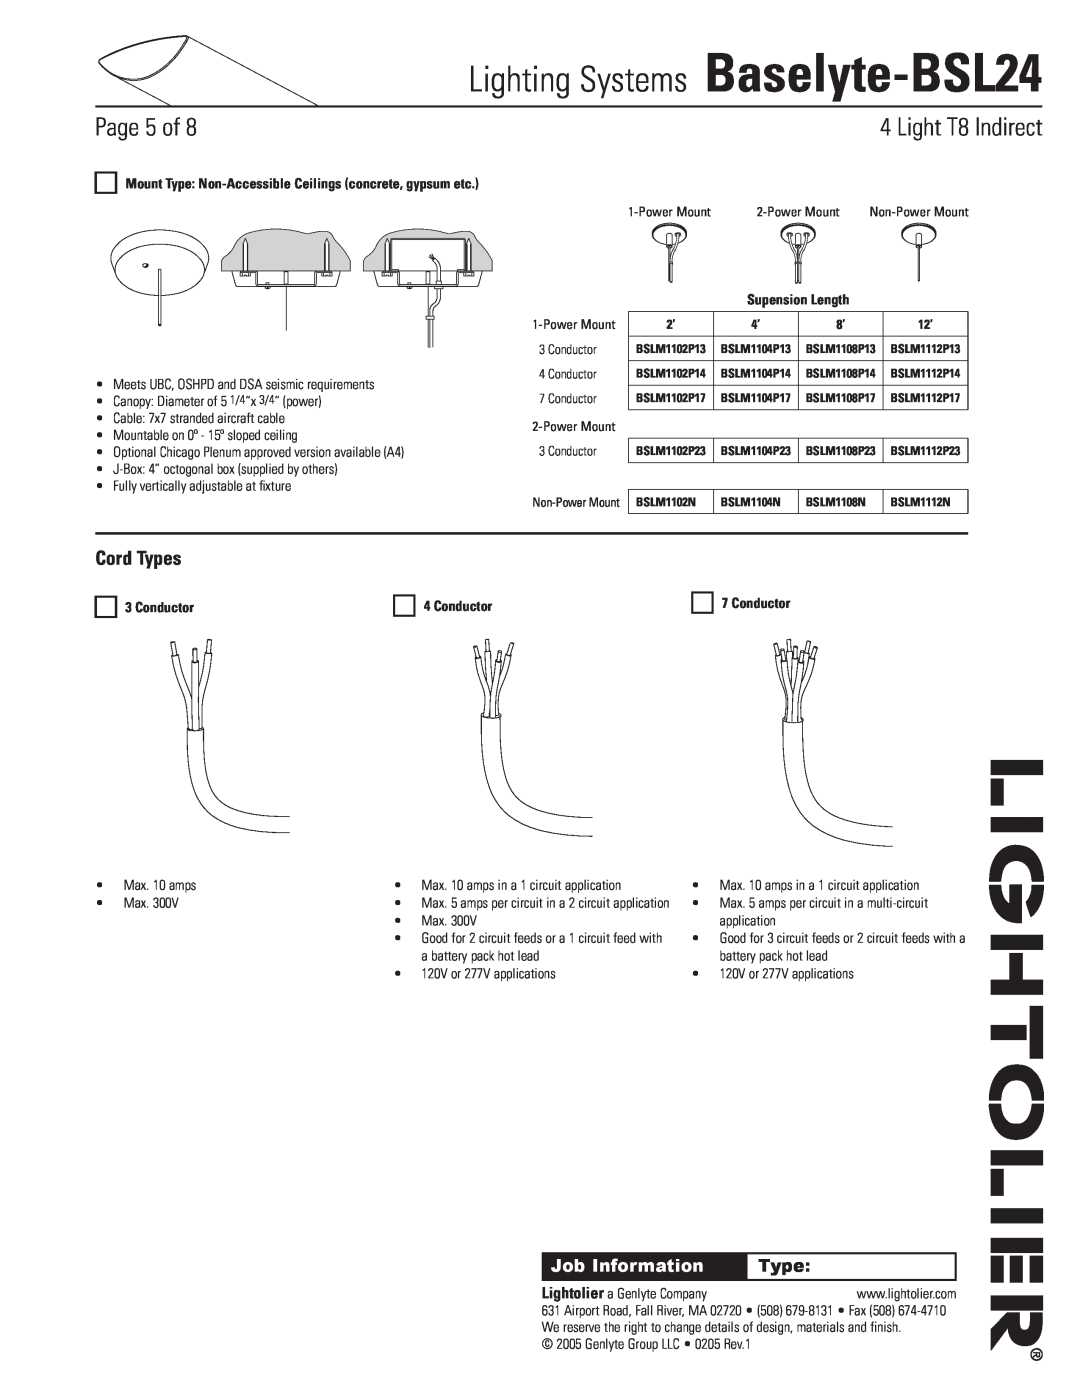 Lightolier Cord Types, Conductor, Lighting Systems Baselyte-BSL24, Page of, Light T8 Indirect, Job Information 